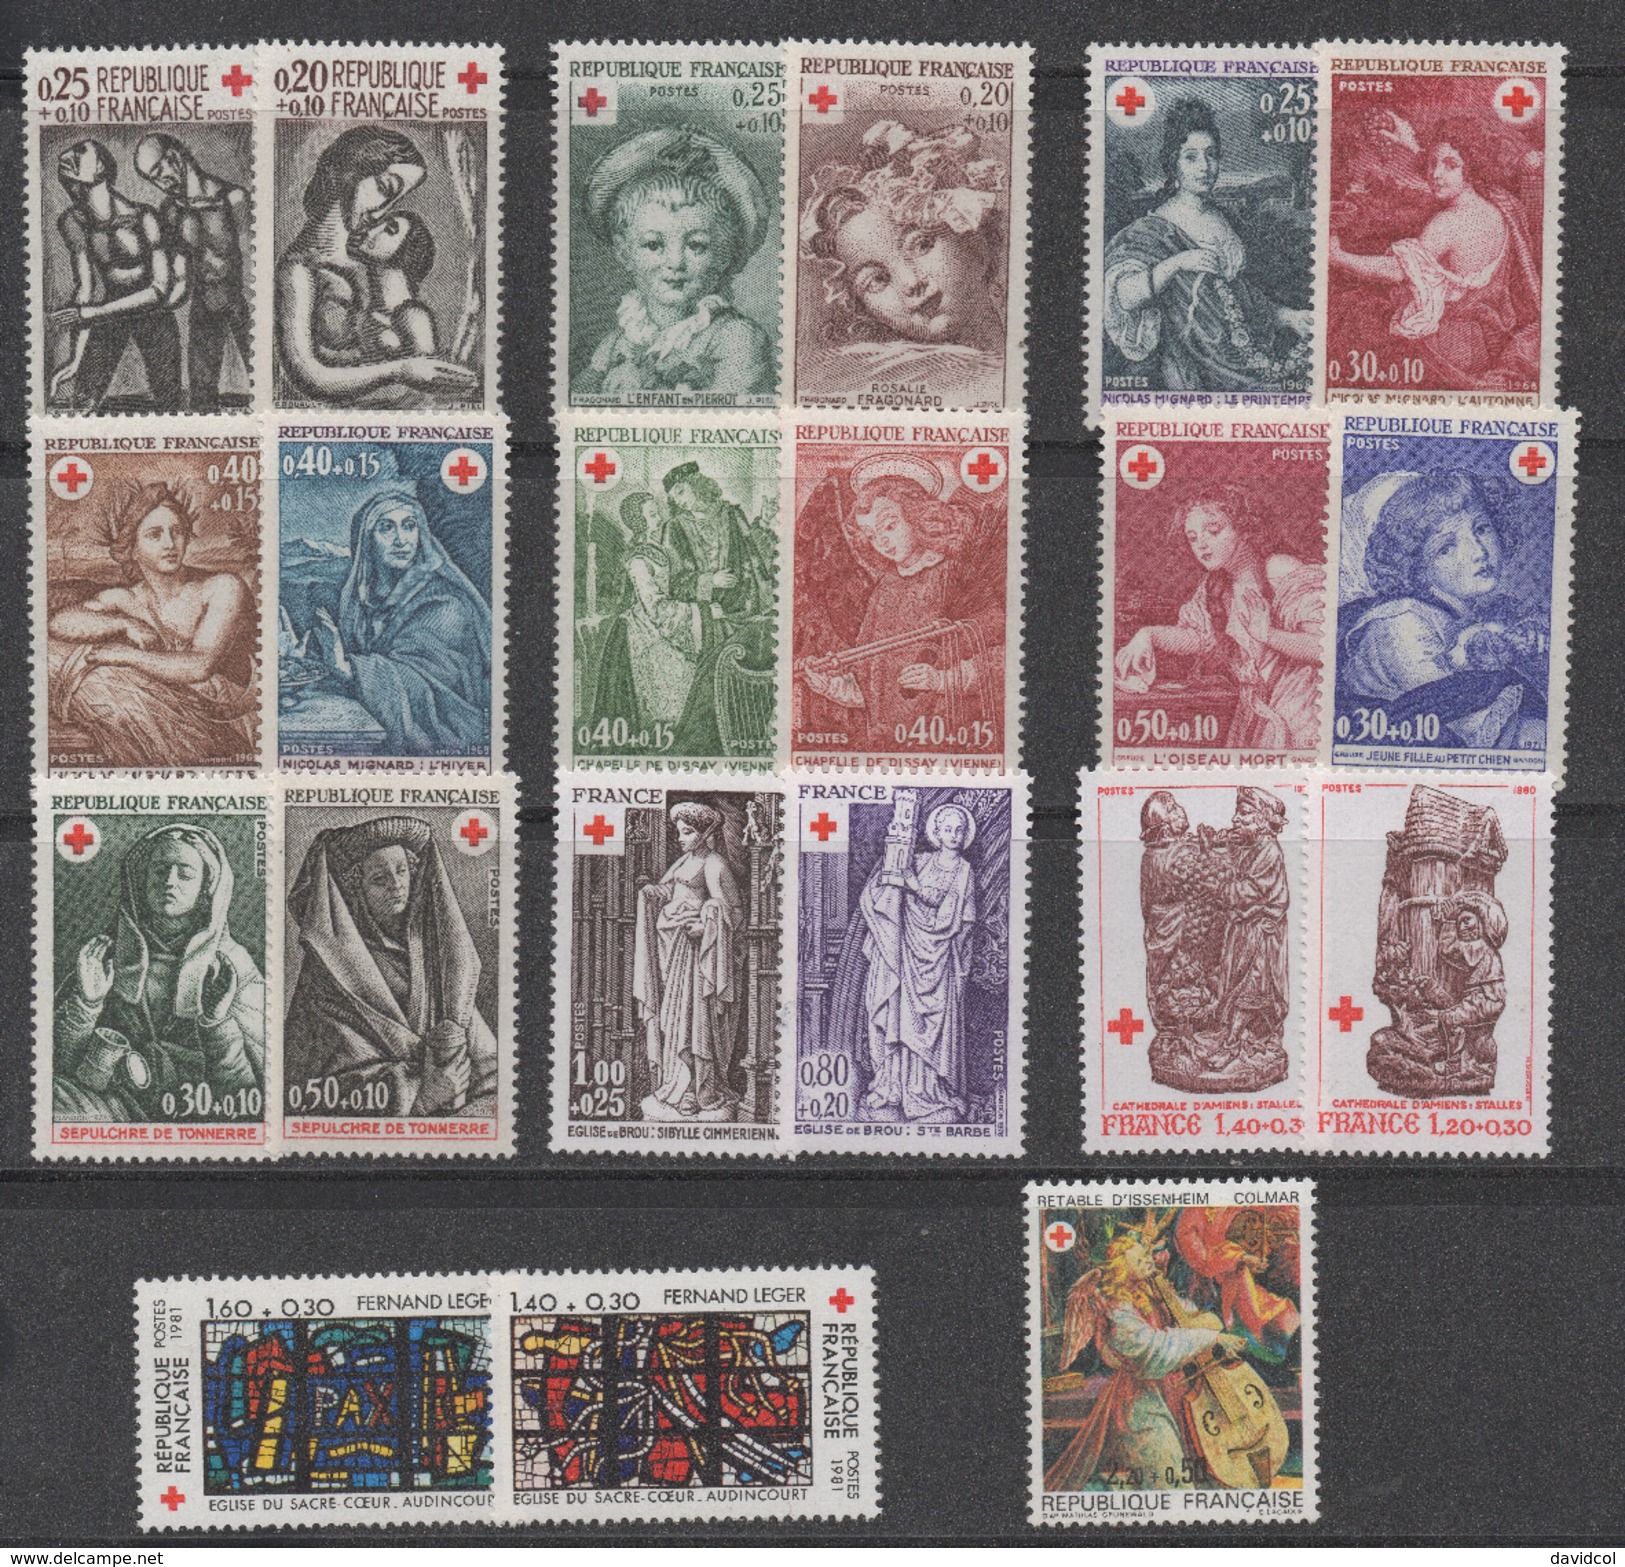 Q460.-. RED CROSS 1961 // 1985 - MNH - LOT X 21 STAMPS. CV: 24.00 EUR - Collections